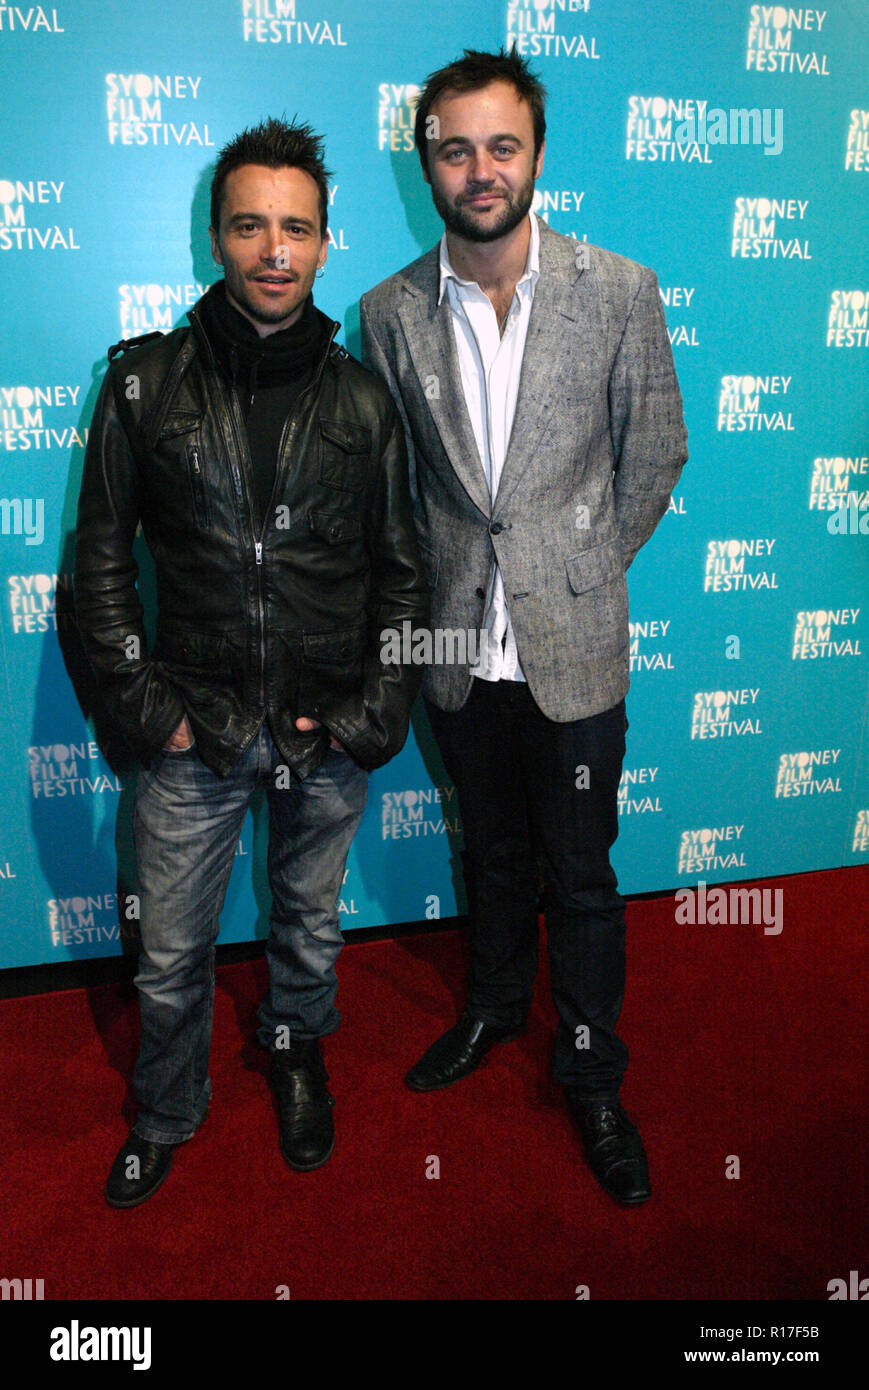 Damian Walshe-Howling (left) and Gyton Grantley The 56th annual Sydney Film Festival, which runs from 3-14 June, is launched with a screening of the movie 'Looking for Eric' at the State Theatre. Sydney, Australia. 03.06.09. Stock Photo